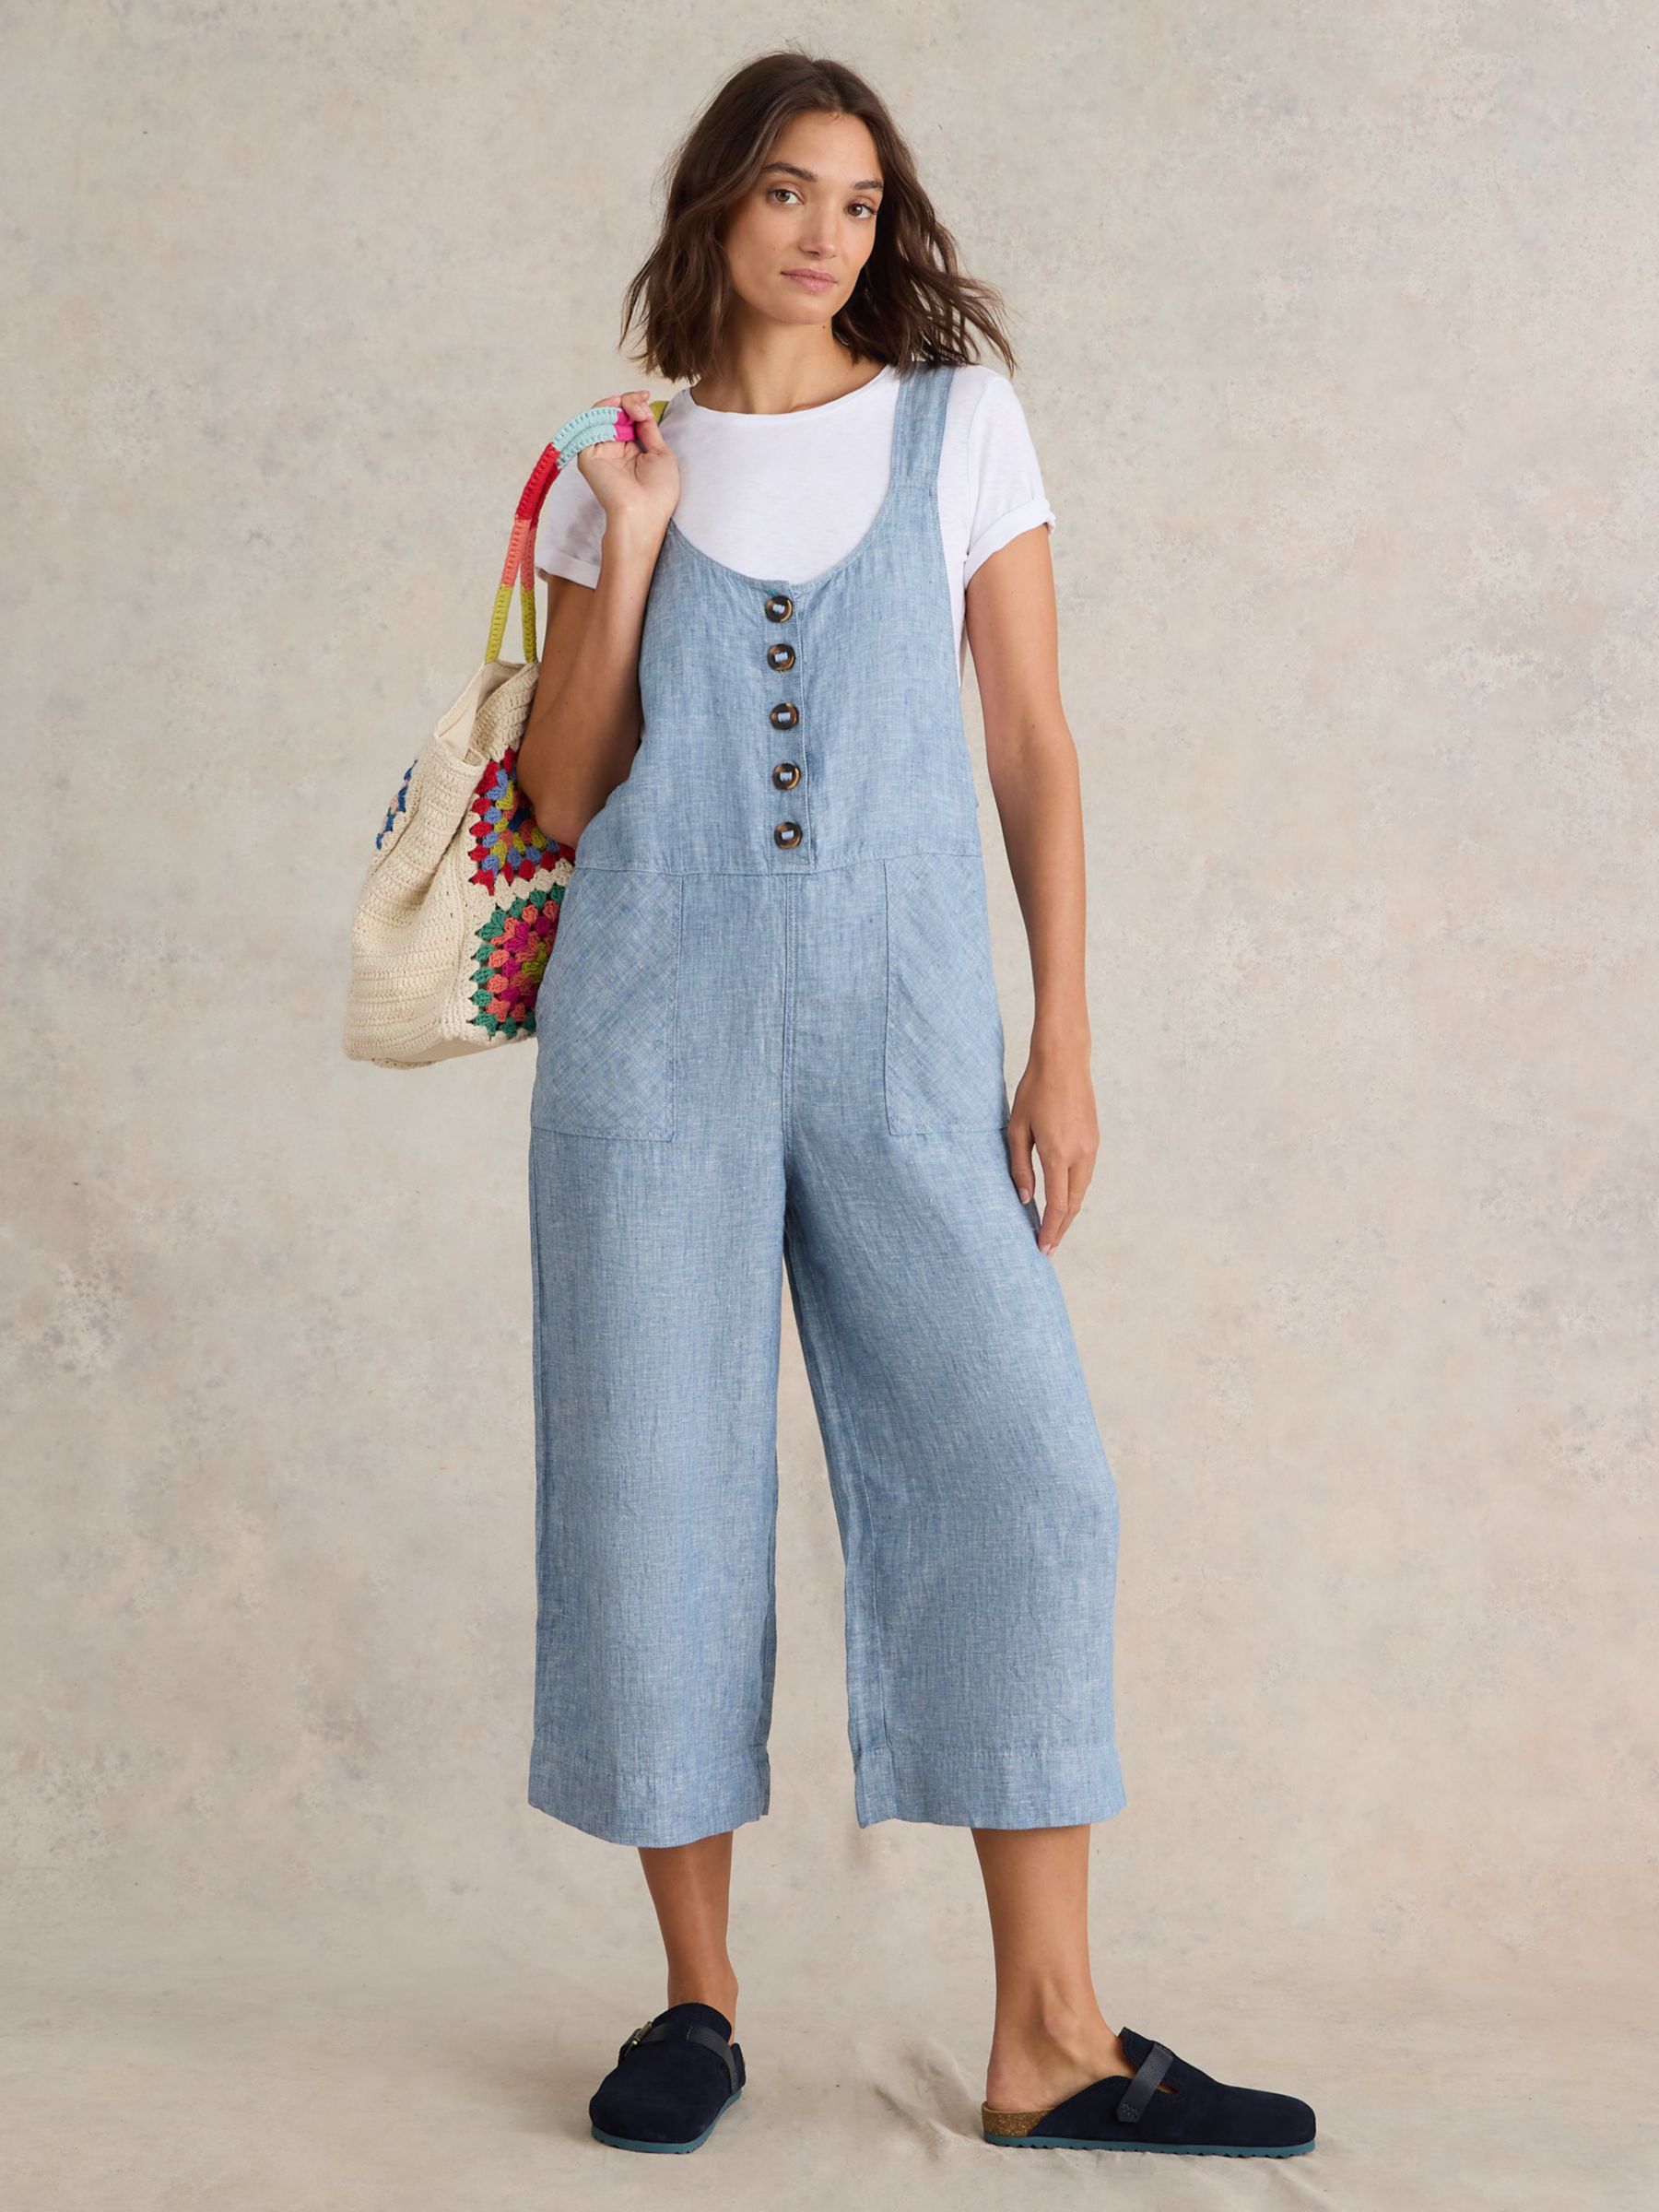 Women's Jumpsuits & Playsuits - Dungarees, Wide Leg